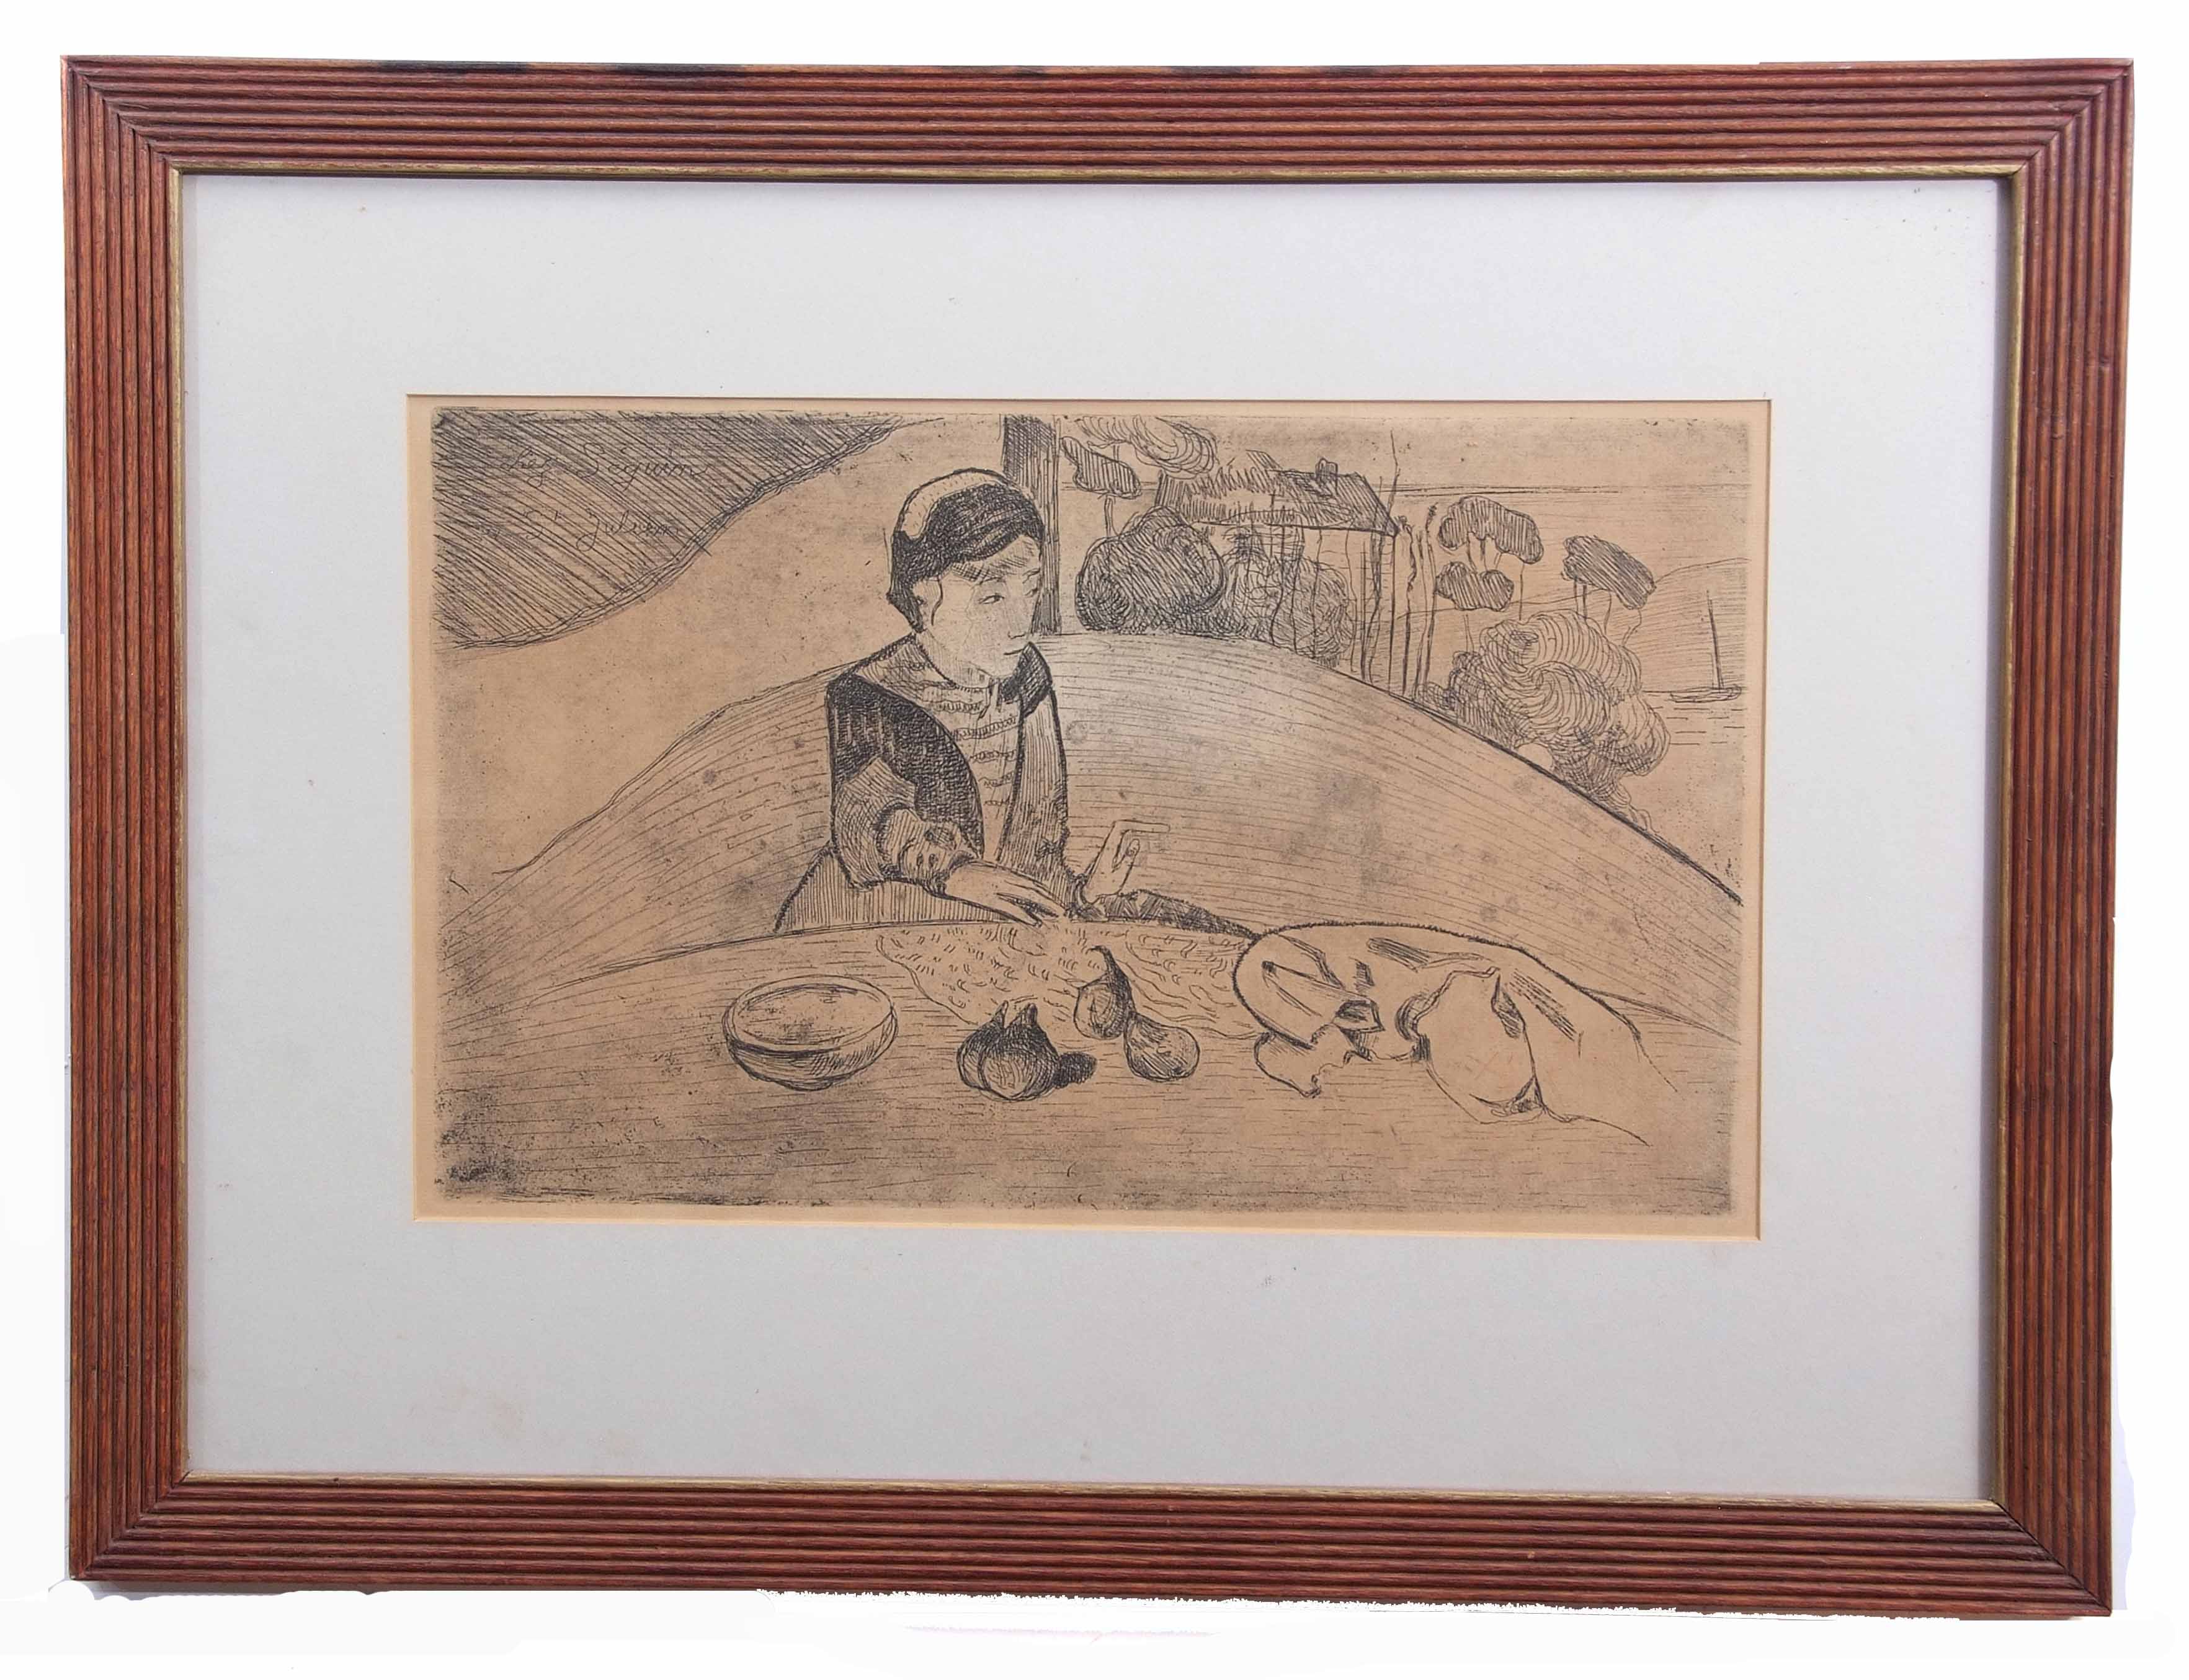 After Paul Gauguin (1848-1903) "La Femme Aux Figues", etching, 27 x 42cm Printed on paper with